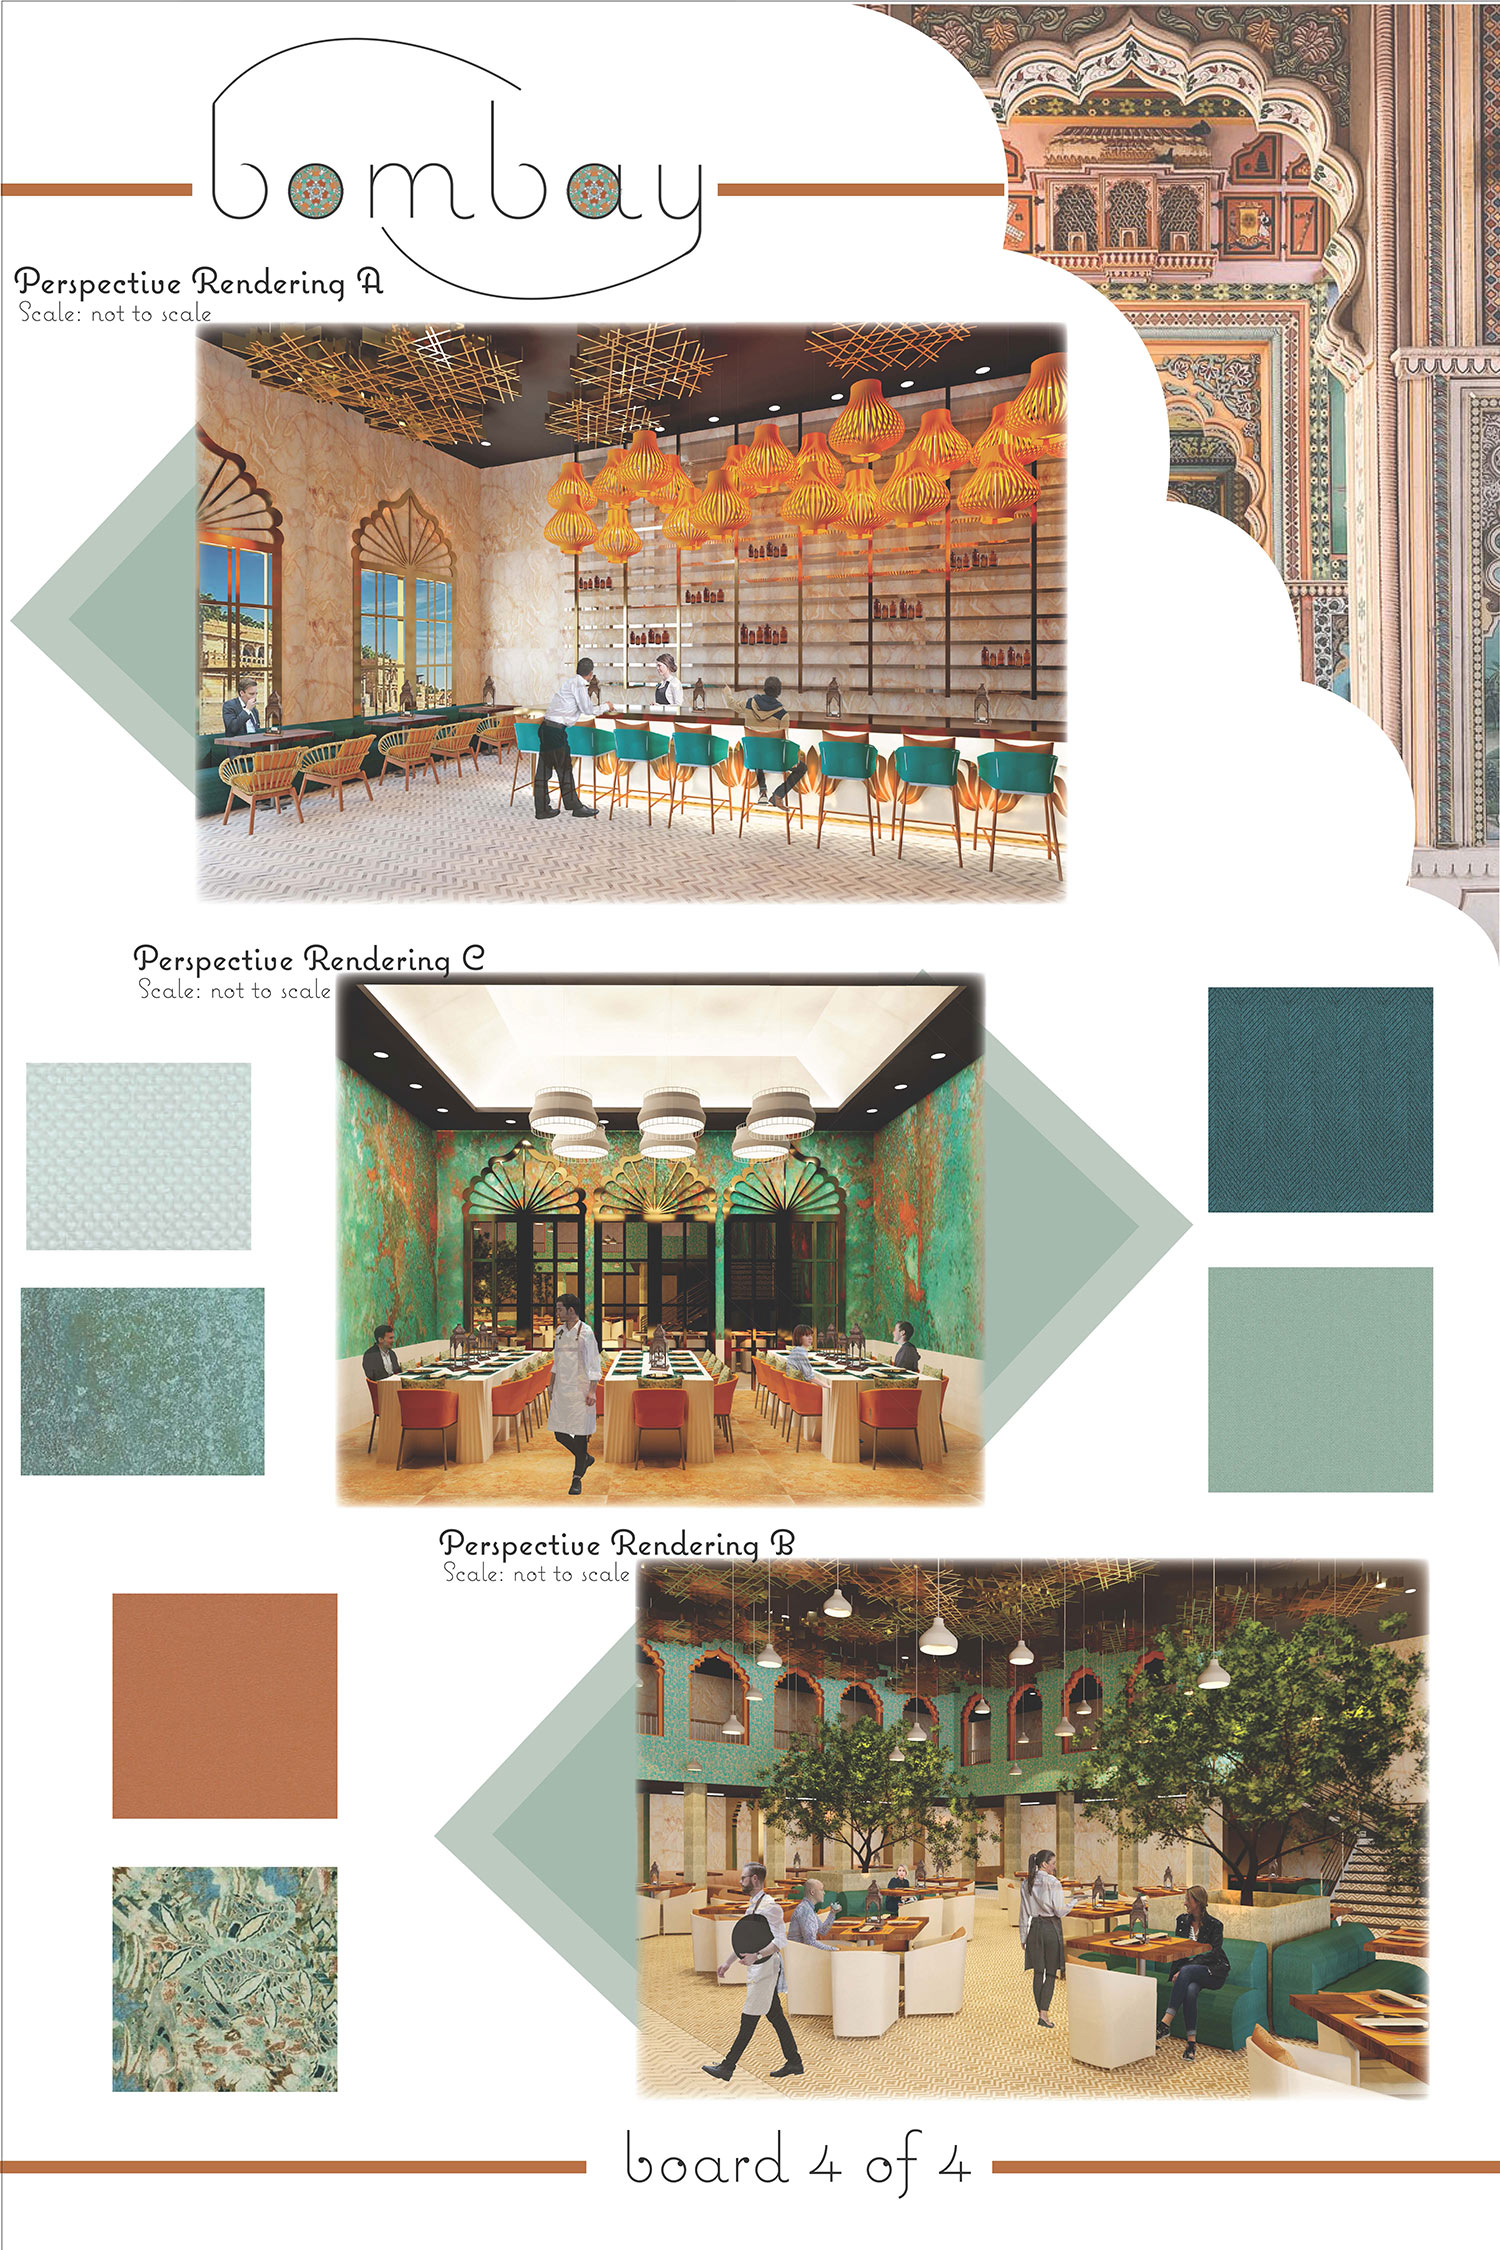 "bombay" board - top: perspective rendering A of inside of a restaurant at bar; next: perspective rendering C of inside of a restaurant with long tables; next: perspective B of smaller tables with greenery